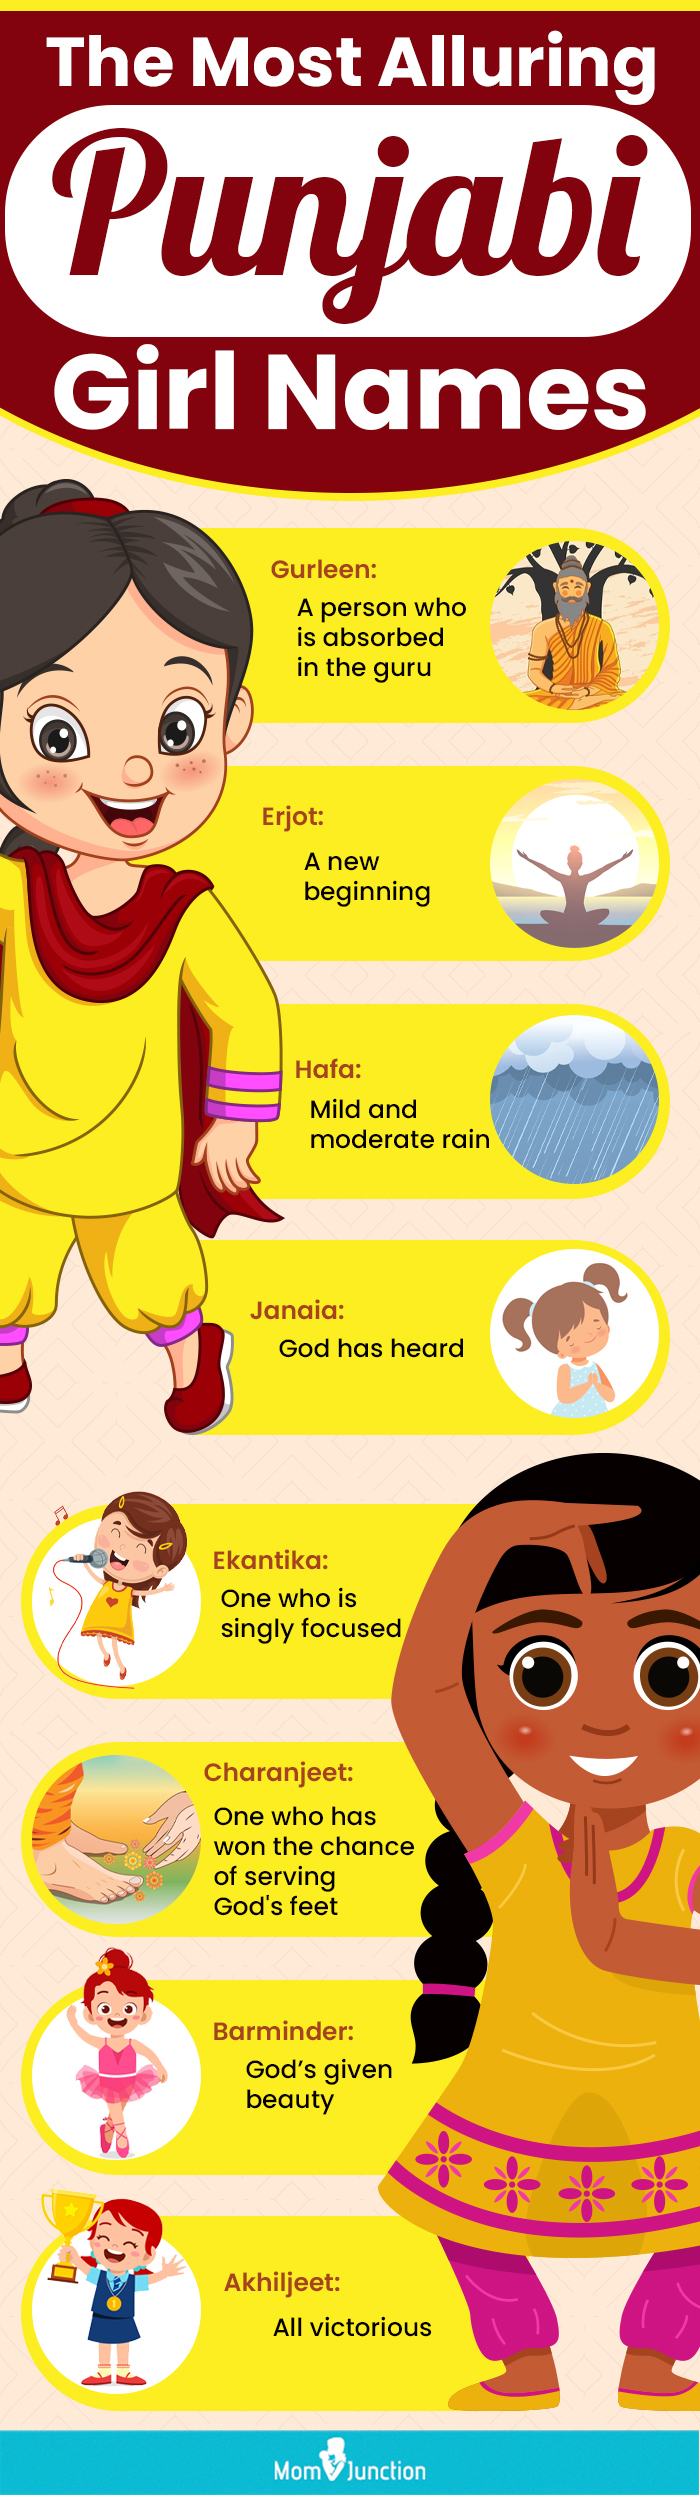 the most alluring punjabi girl names(infographic)